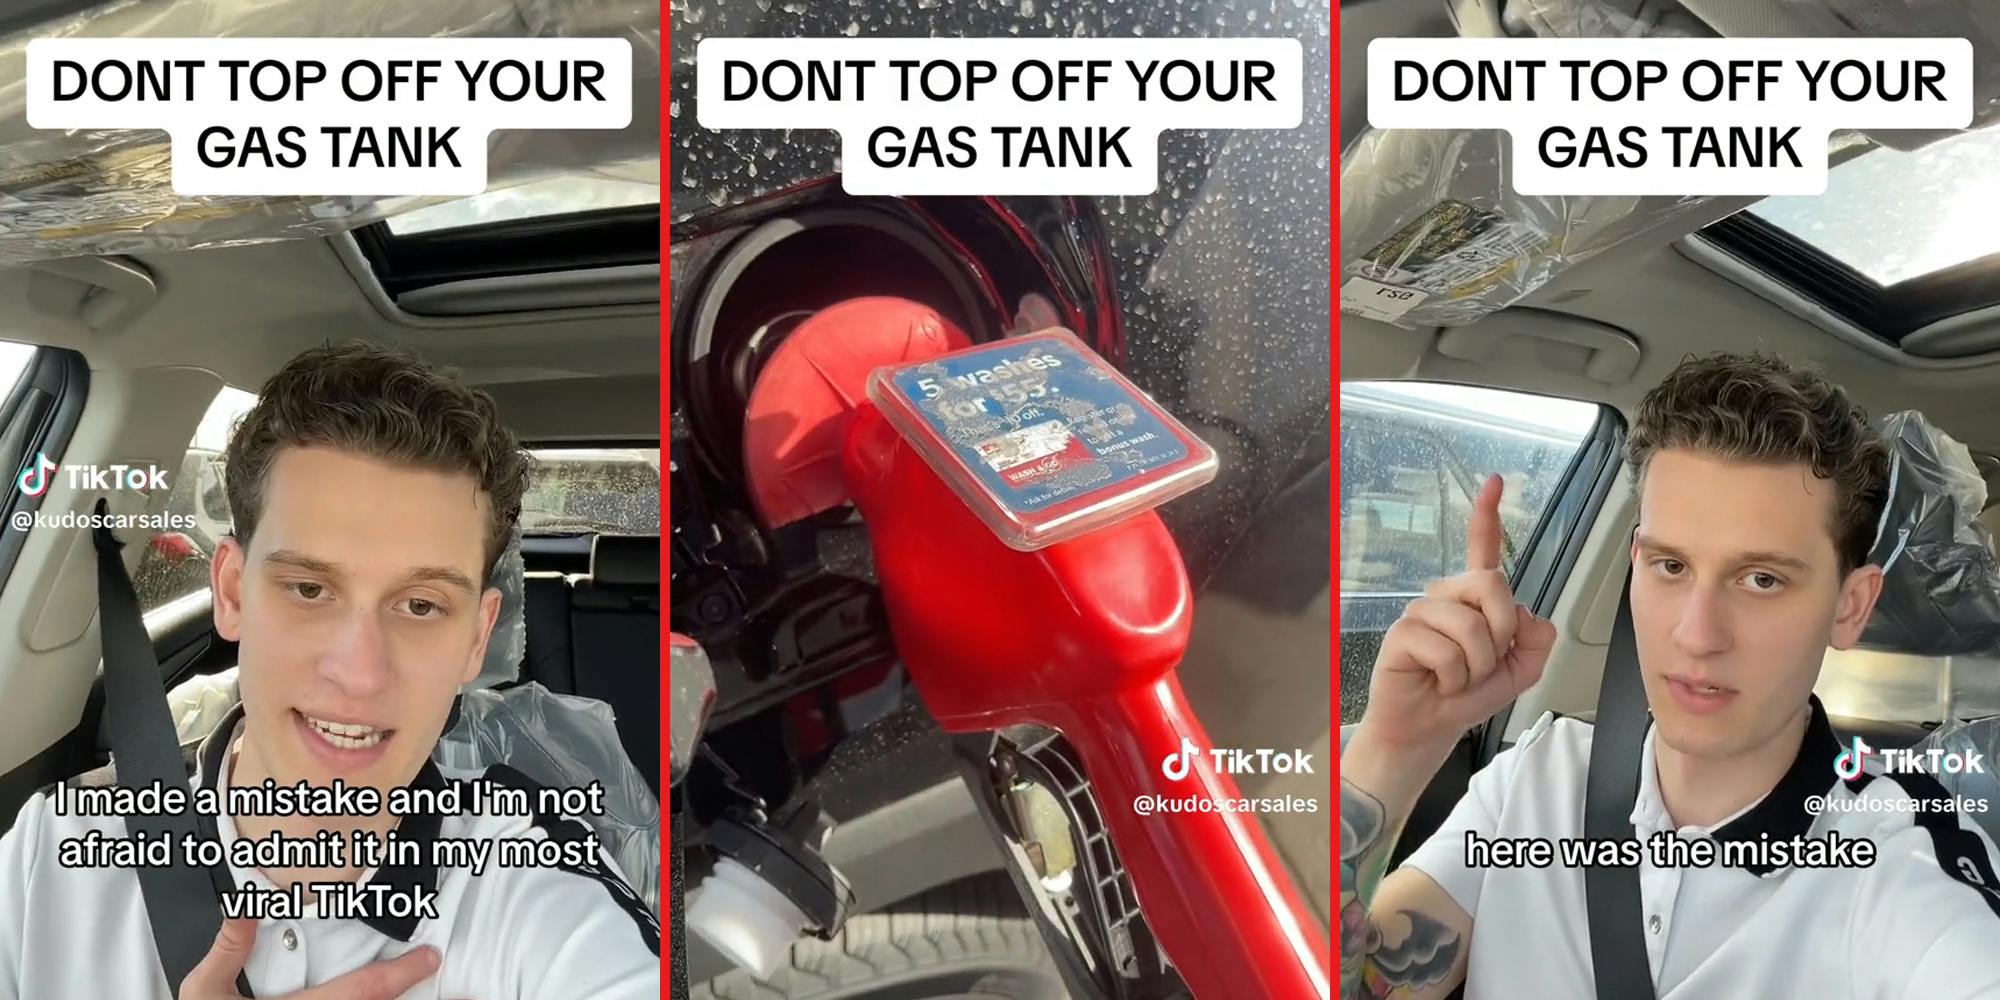 man in car (l&r) gas pump in gas tank (c) all with caption "don't top off your gas tank"